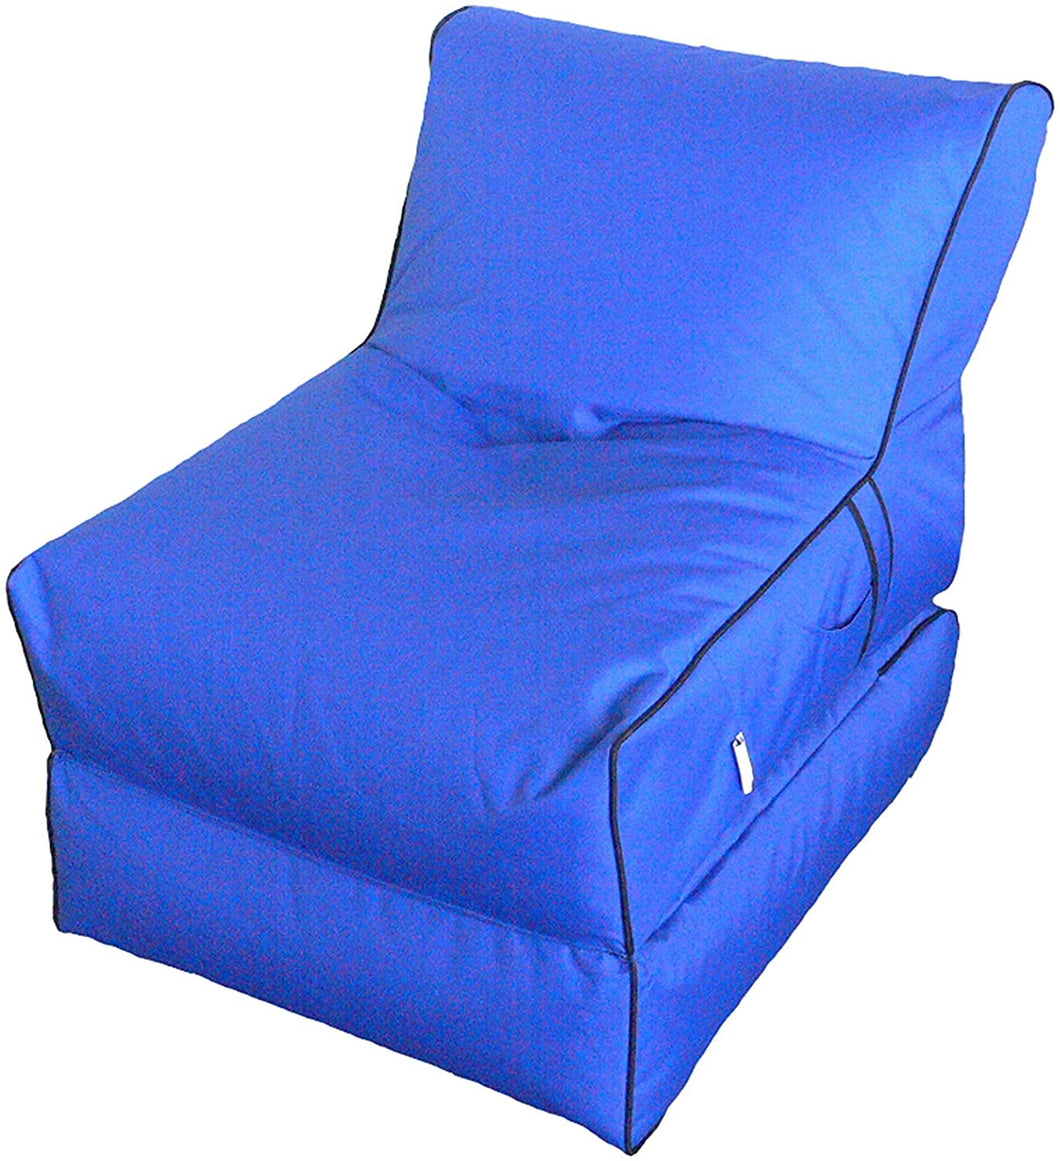 Boscoman - Jumbo Madera Outdoor Flip Chair Lounger - Blue - COVER ONLY